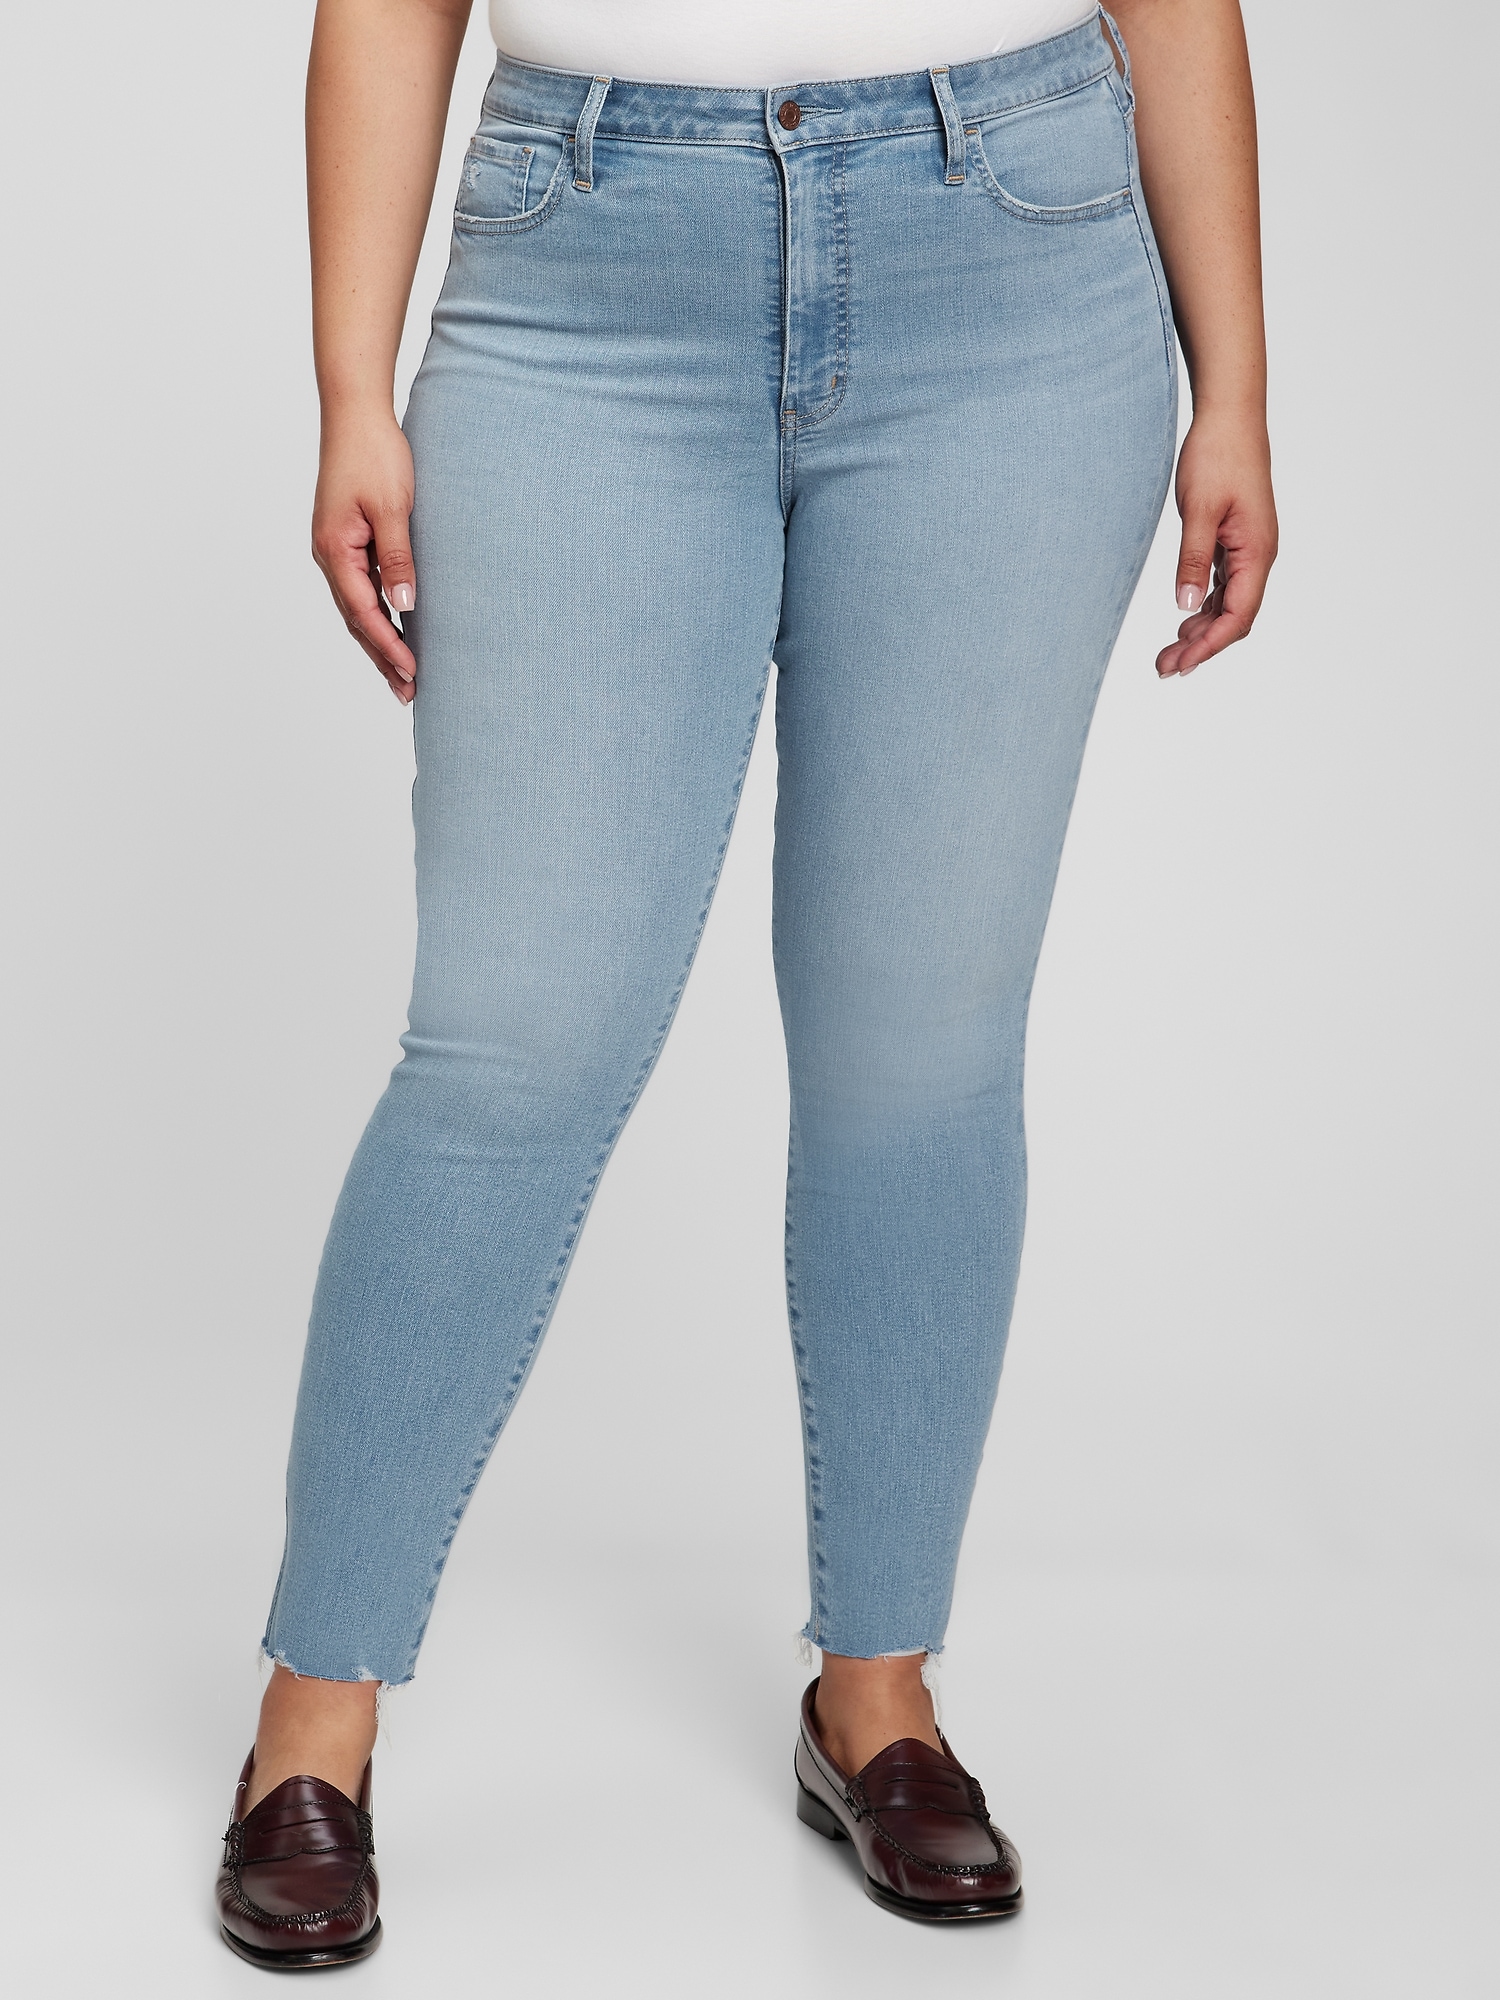 Buy Gap High Waisted Universal Jeggings from the Gap online shop